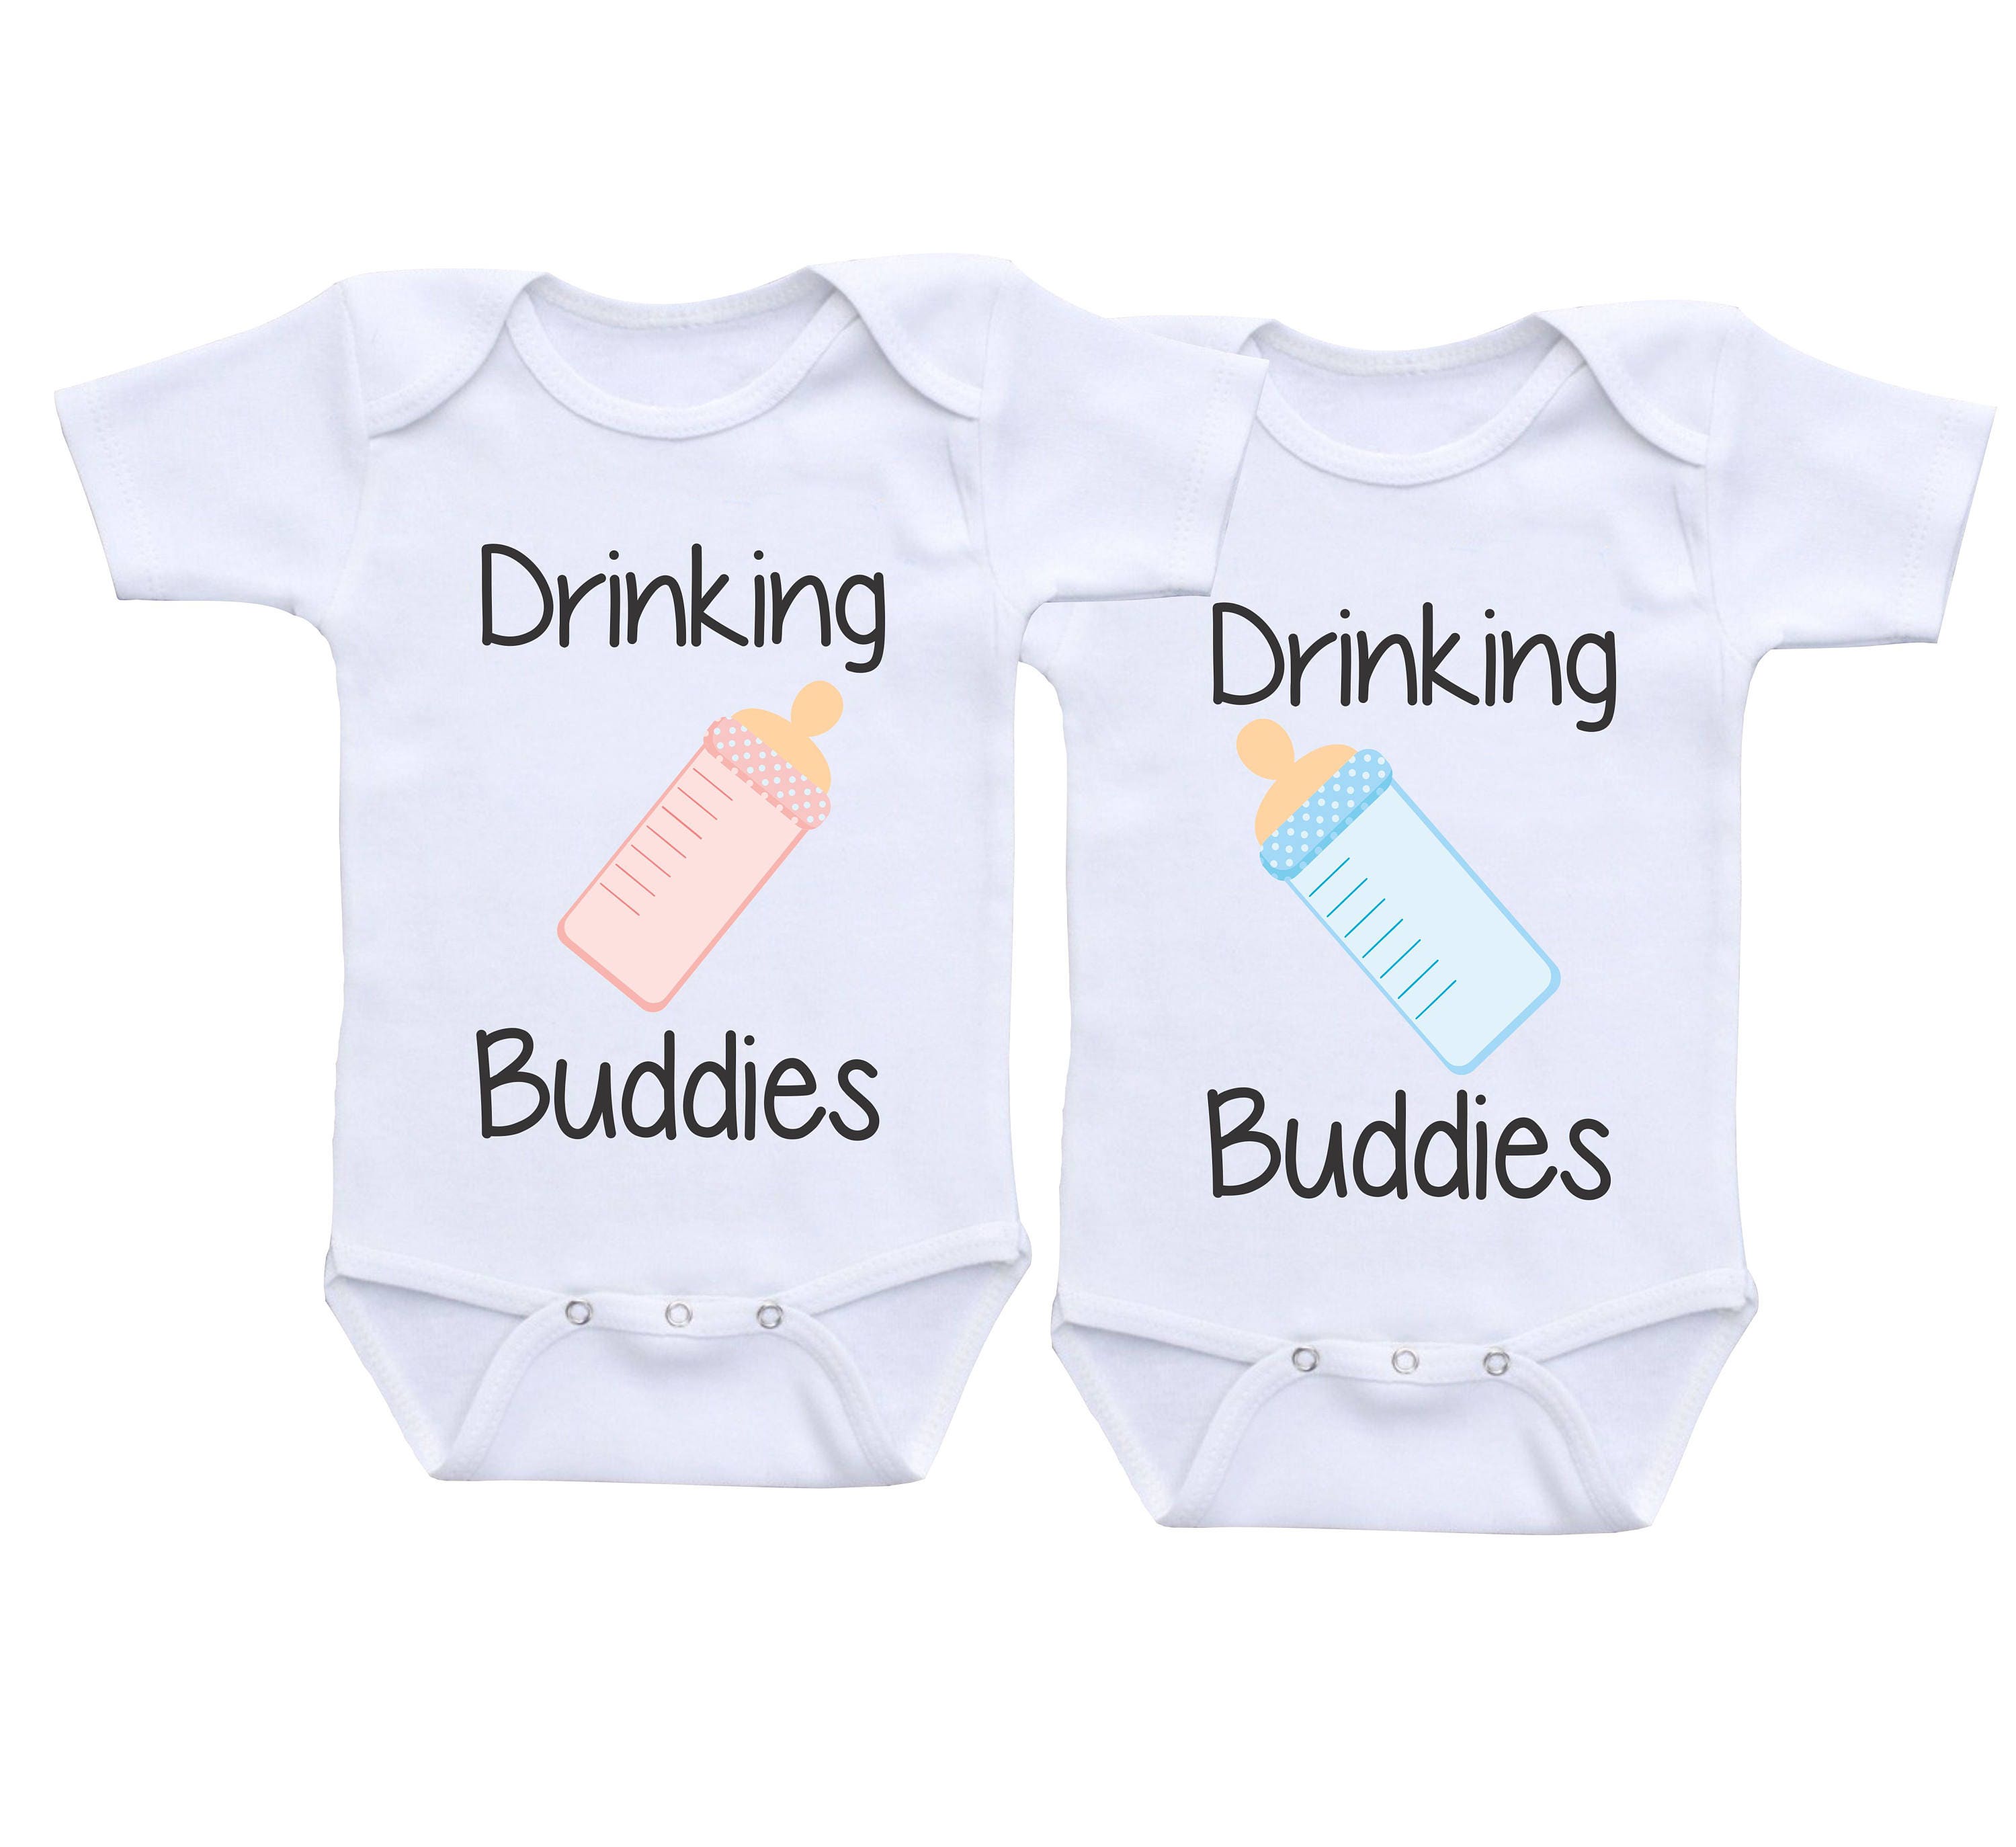 Twins onesies twin onesies twins baby gifts twins outfits twins gifts baby twins outfits baby twins clothes baby twins clothing twin outfits